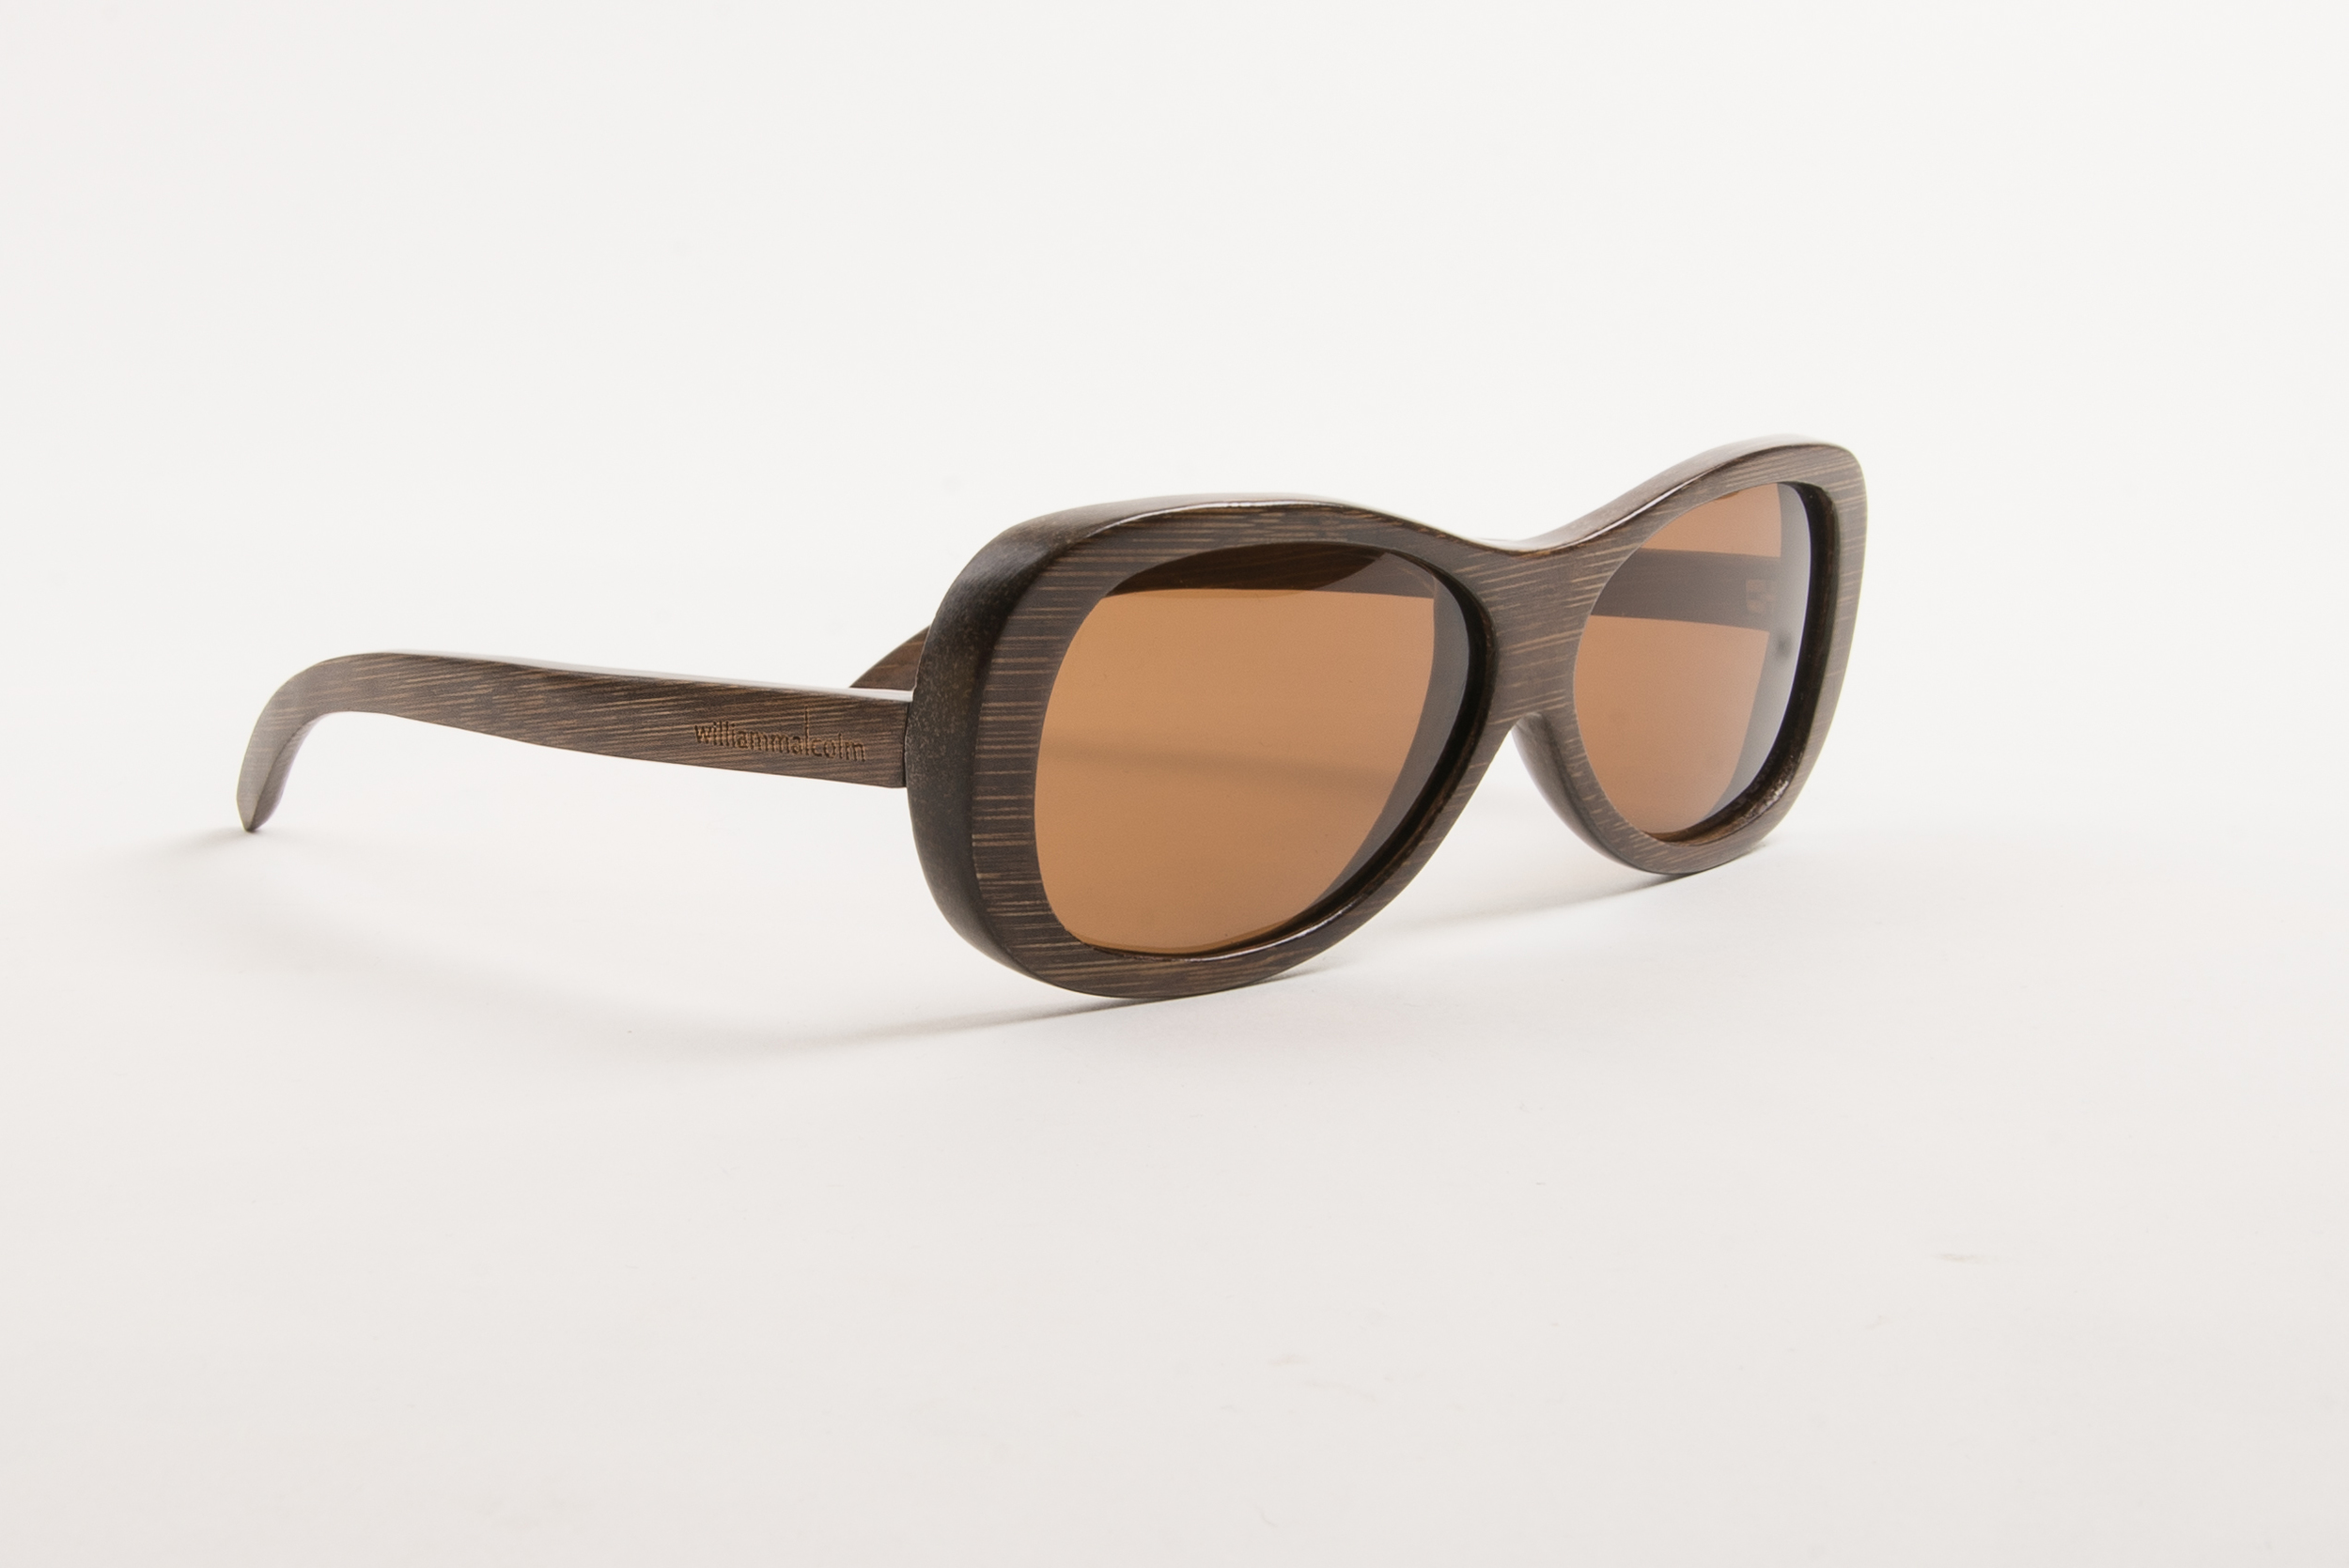 William Malcolm Luxe Collection Wood Eyewear